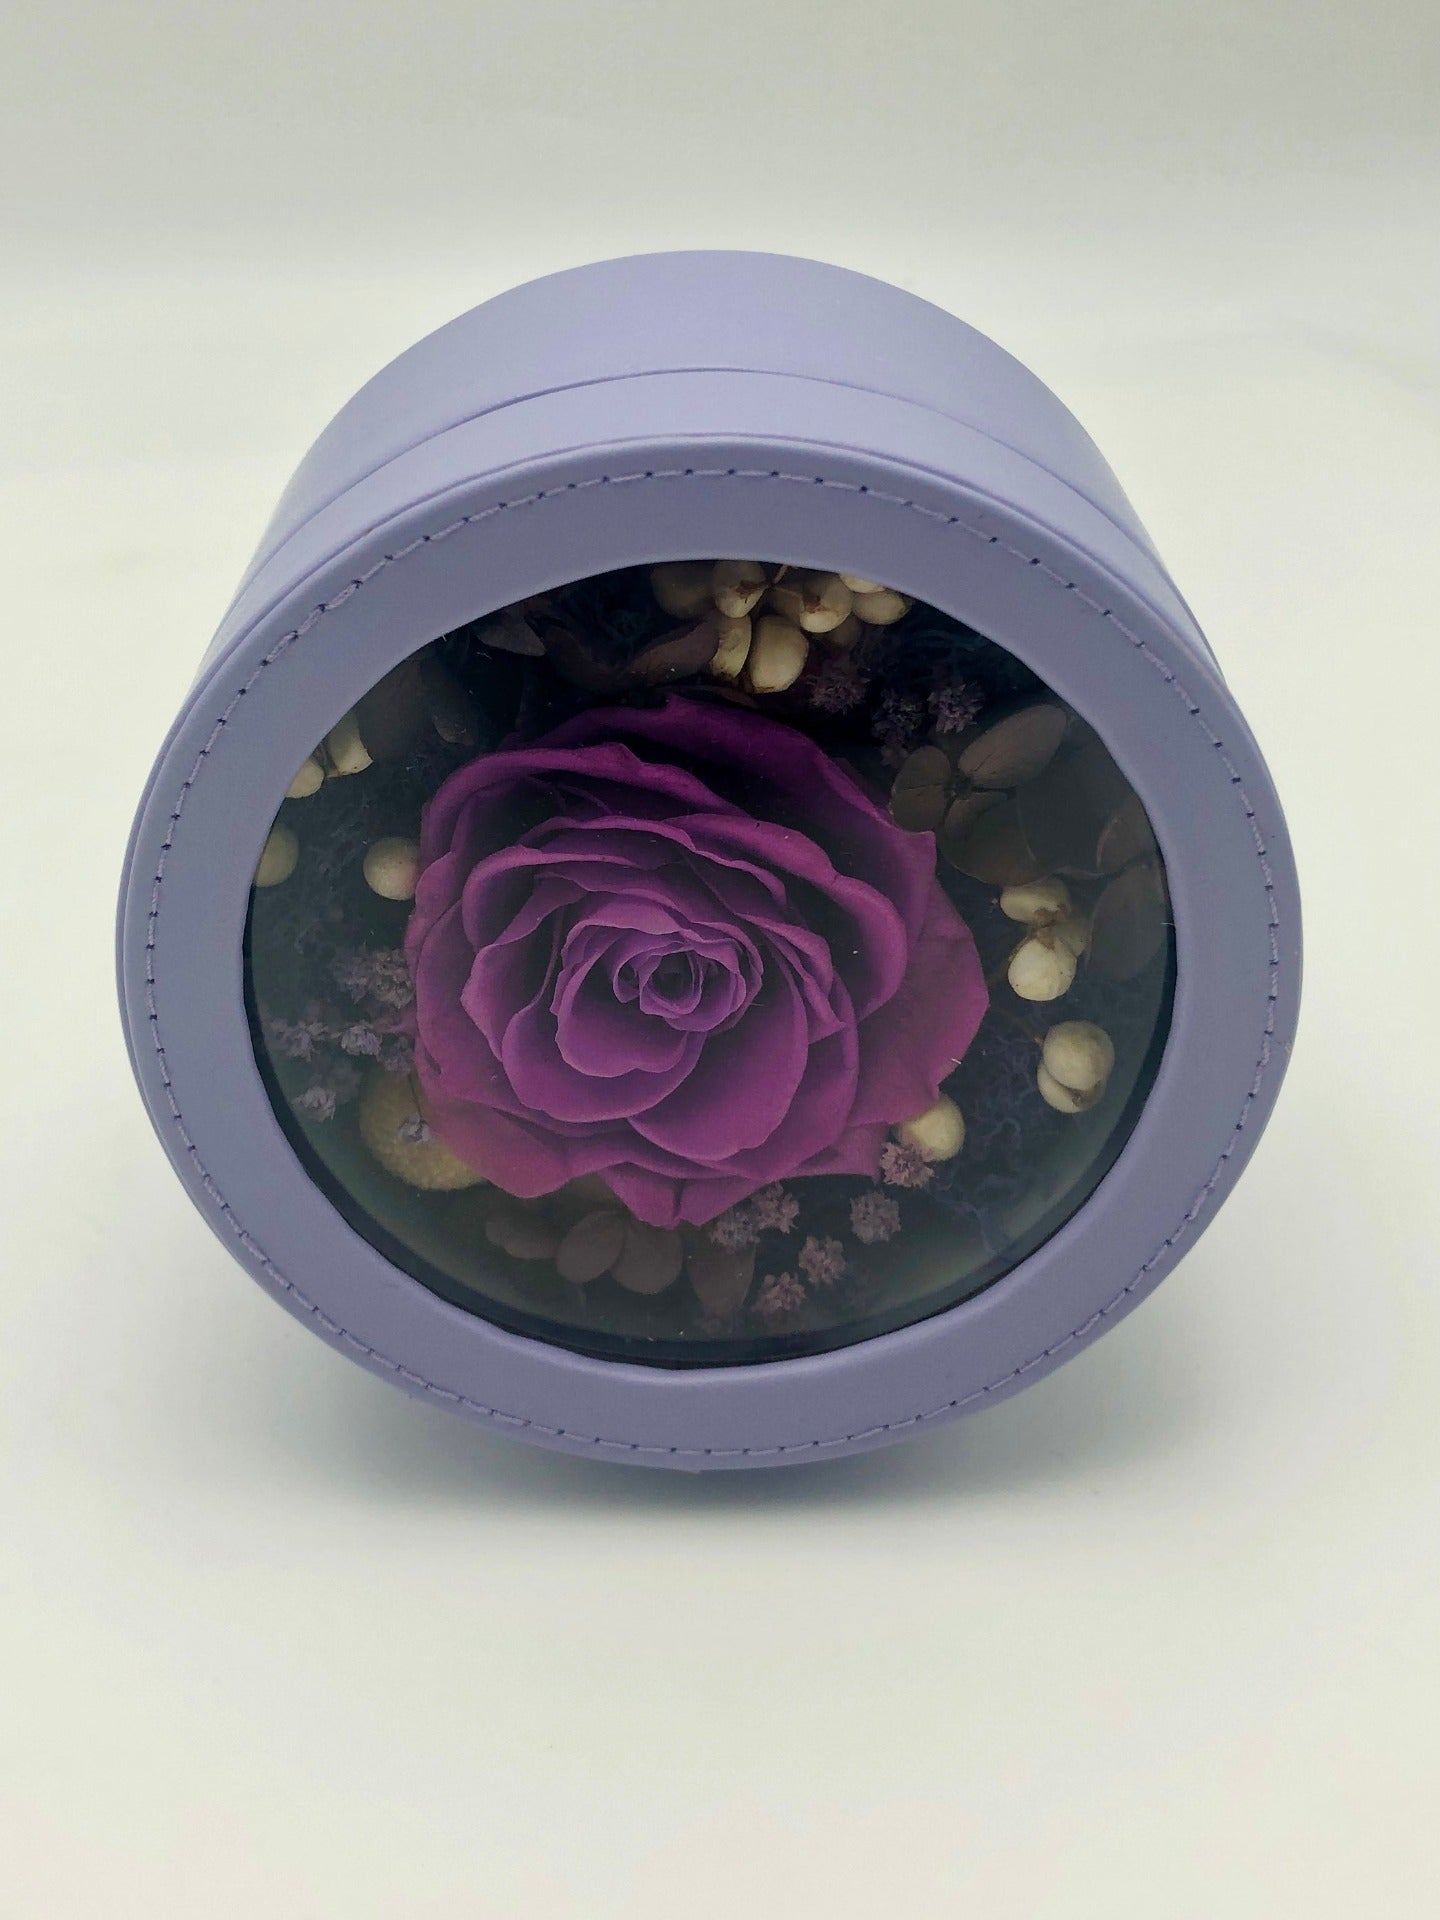 A photo of a stunning dark purple rose, beautifully preserved and displayed in a light purple round gift box. It’s a timeless symbol of elegance and beauty.